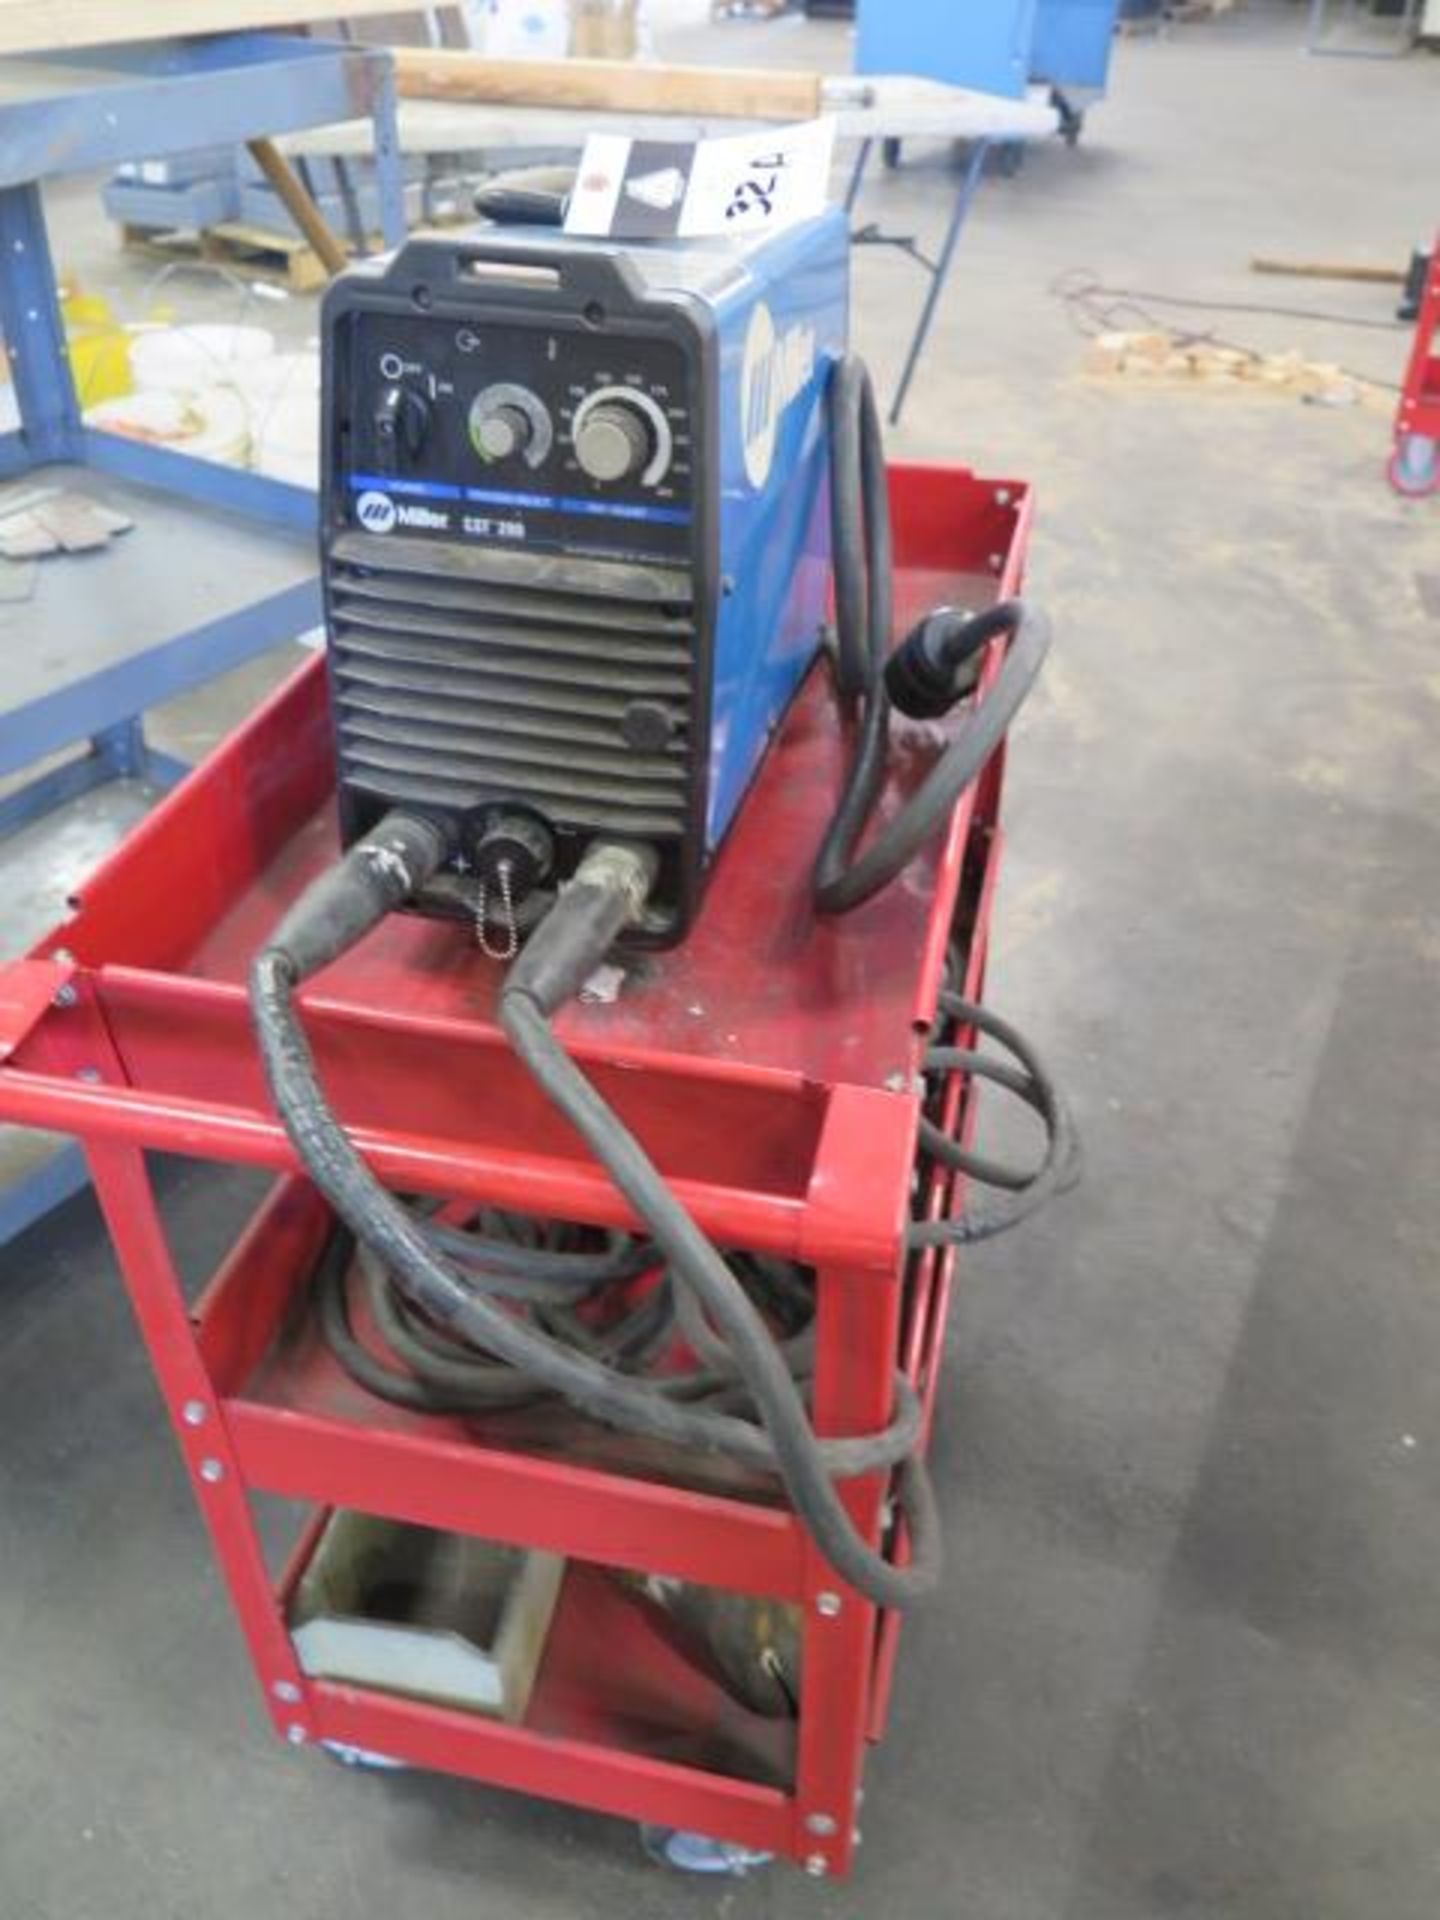 Miller CST280 Arc Welding Power Source s/n MD380346G (SOLD AS-IS - NO WARRANTY)